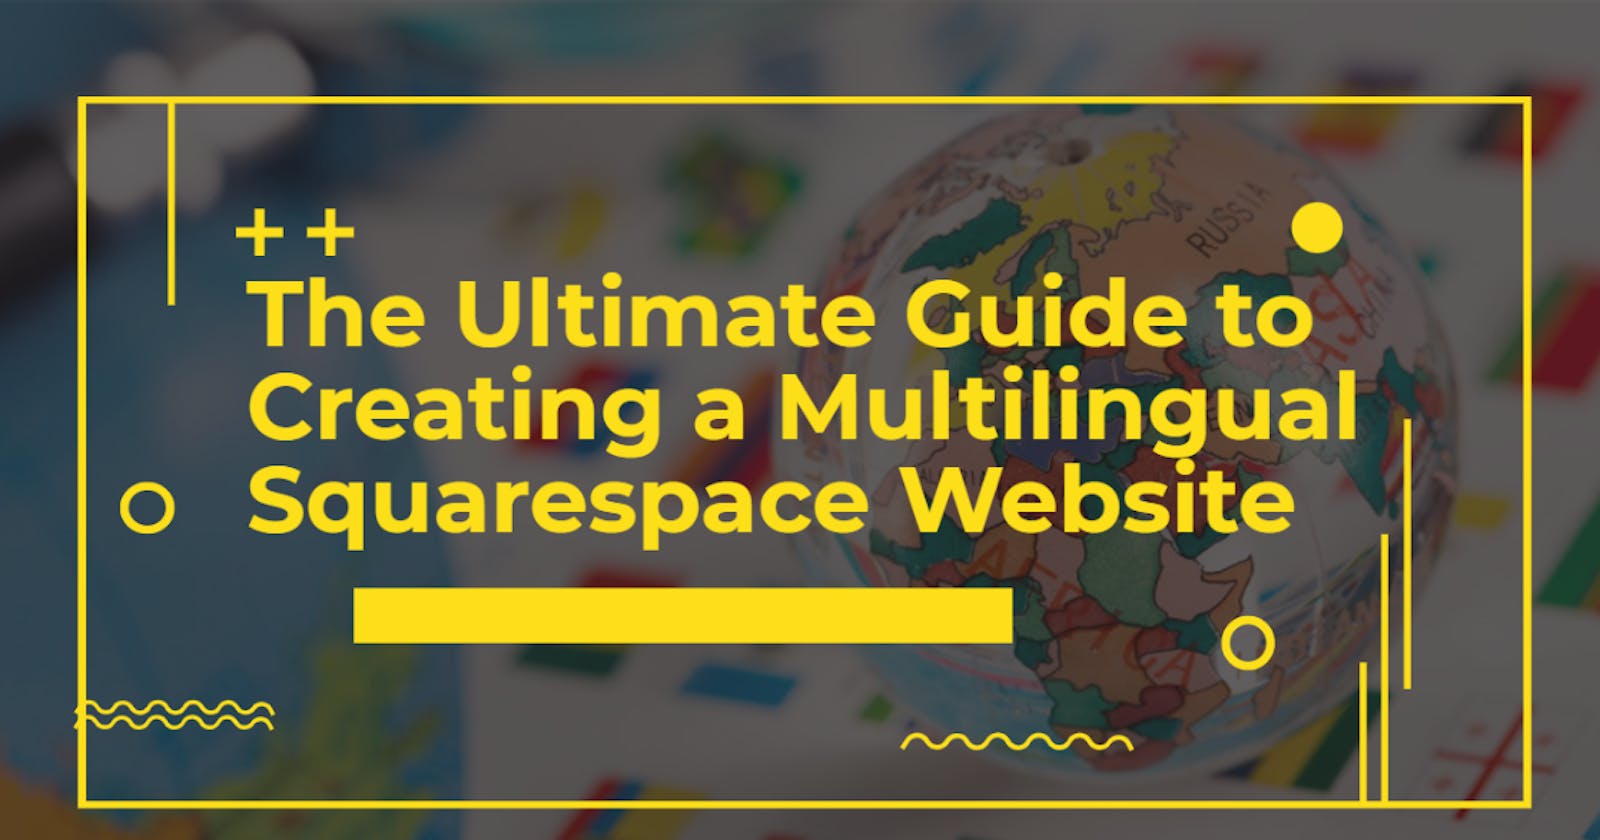 The Ultimate Guide to Creating a Multilingual Squarespace Website